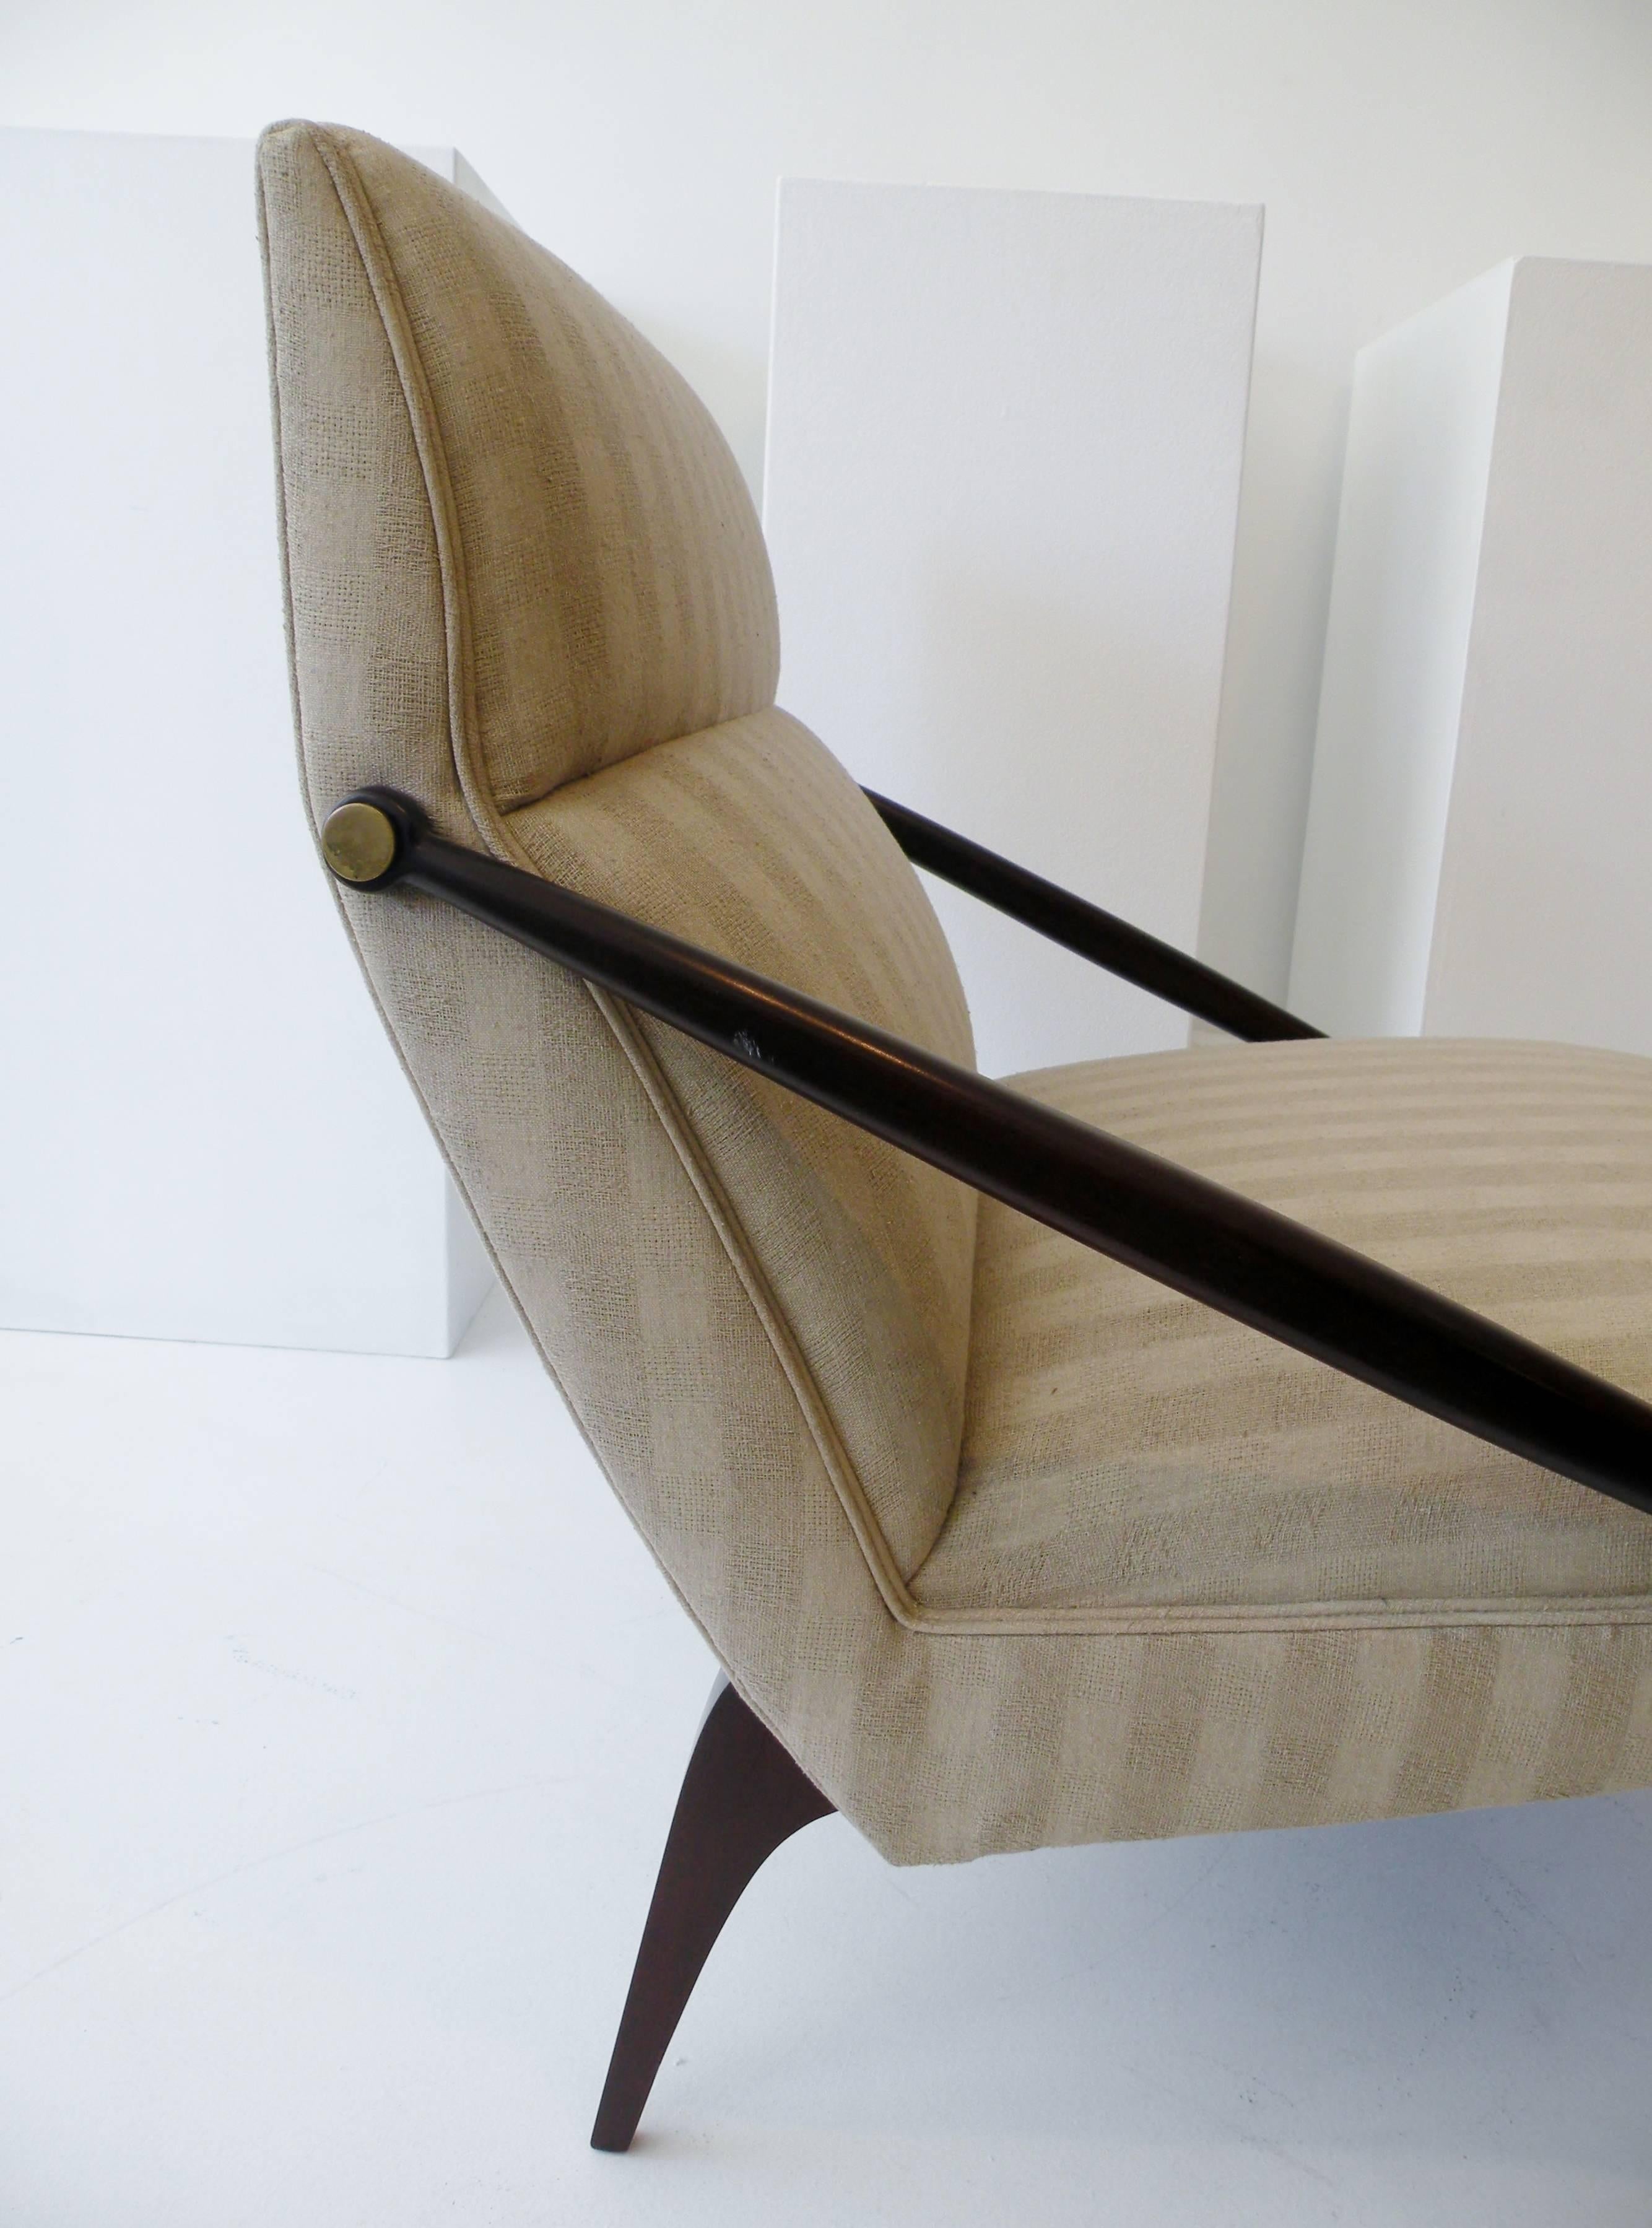 20th Century 1950s Gio Ponti Style Cantilevered Lounge Chair Made by Singer & Sons